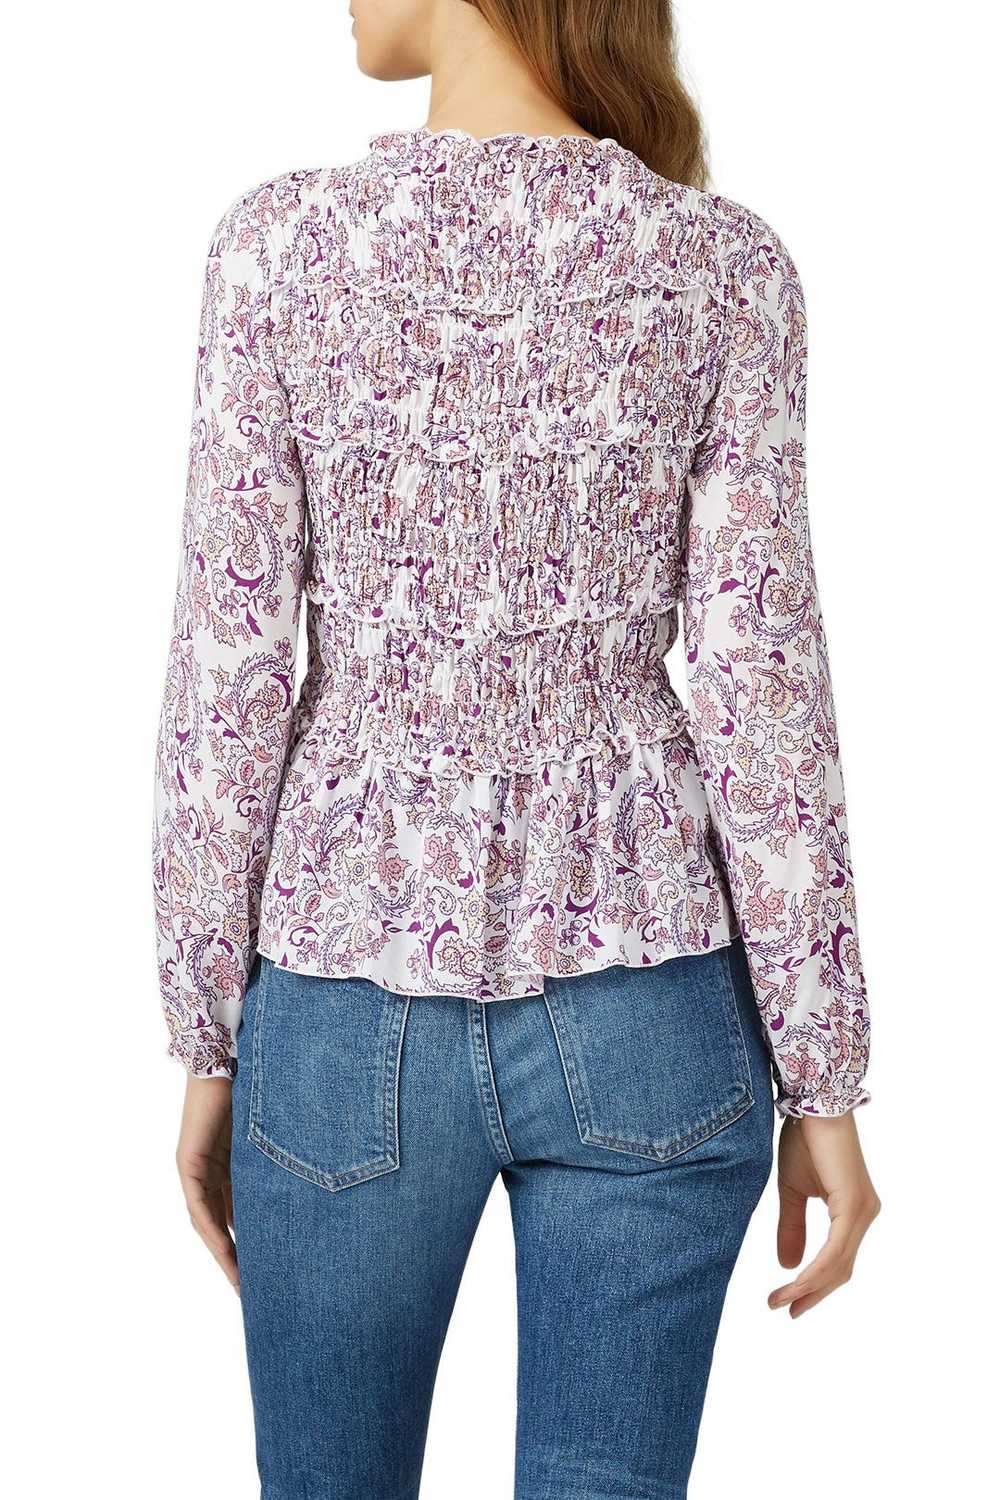 See by Chloé Long Sleeve Ruffle Top - image 3